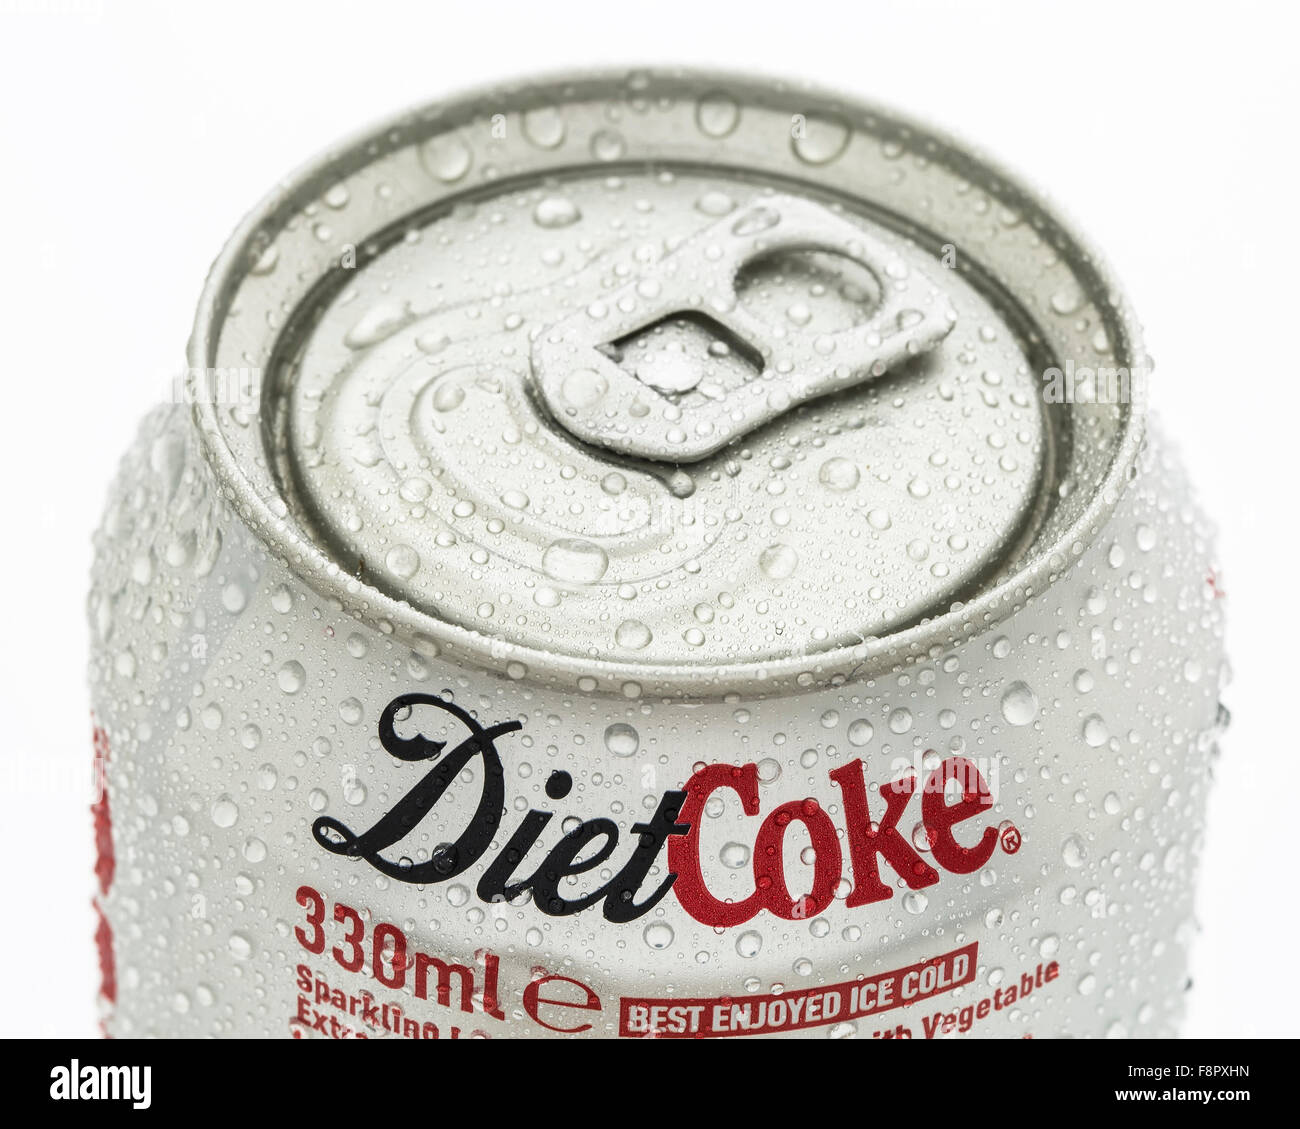 Can of Ice Cold Diet Coca-Cola on a white background Stock Photo